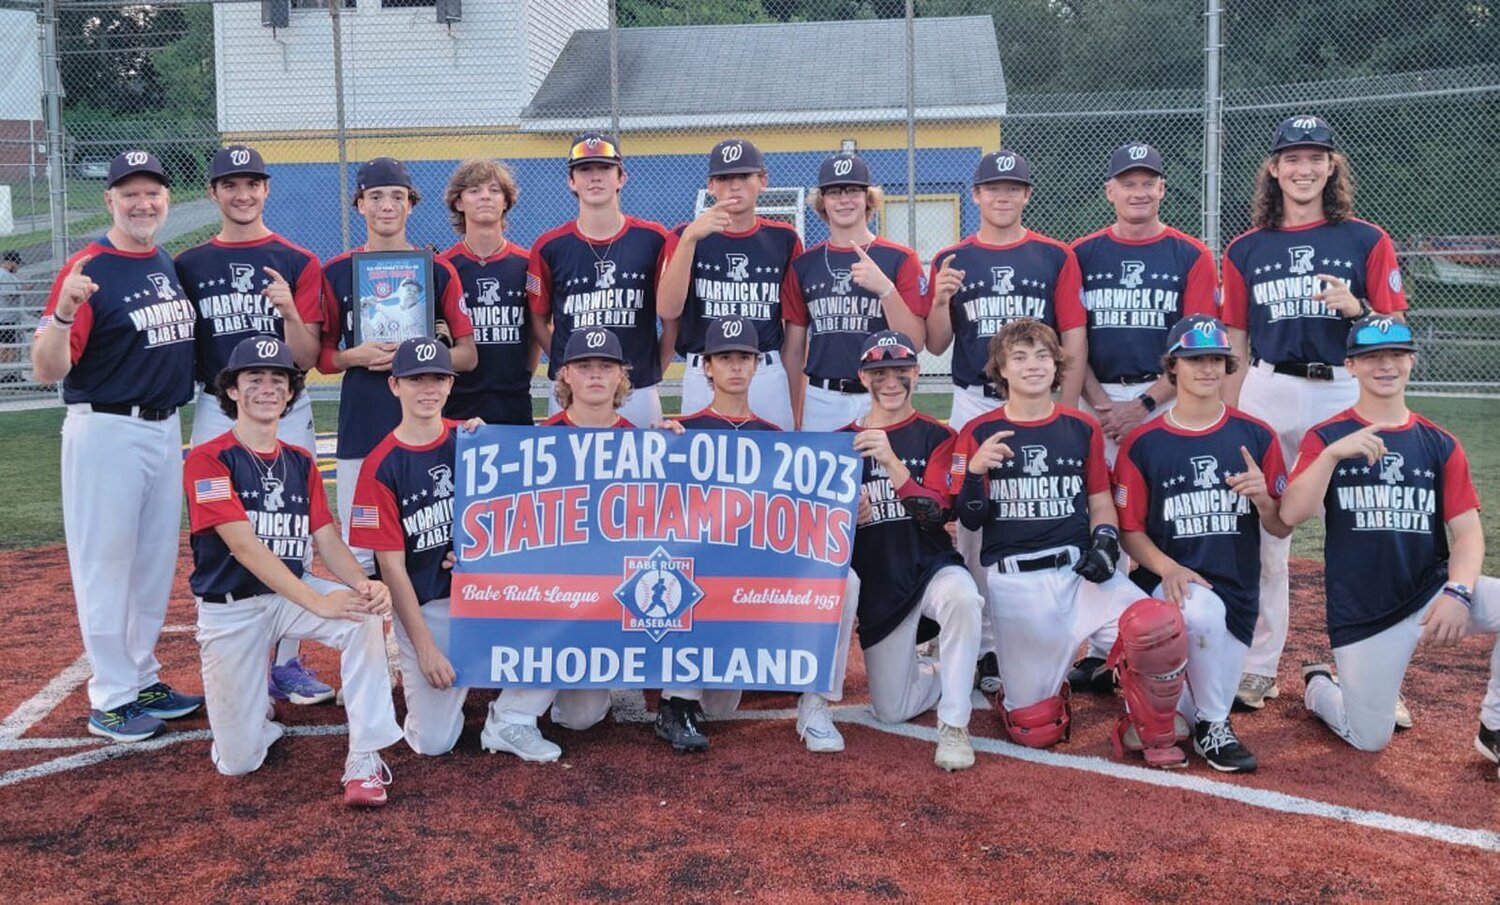 THREE PEAT: The Warwick PAL 15-U Babe Ruth team after winning its third straight state title last week. (Submitted photo)